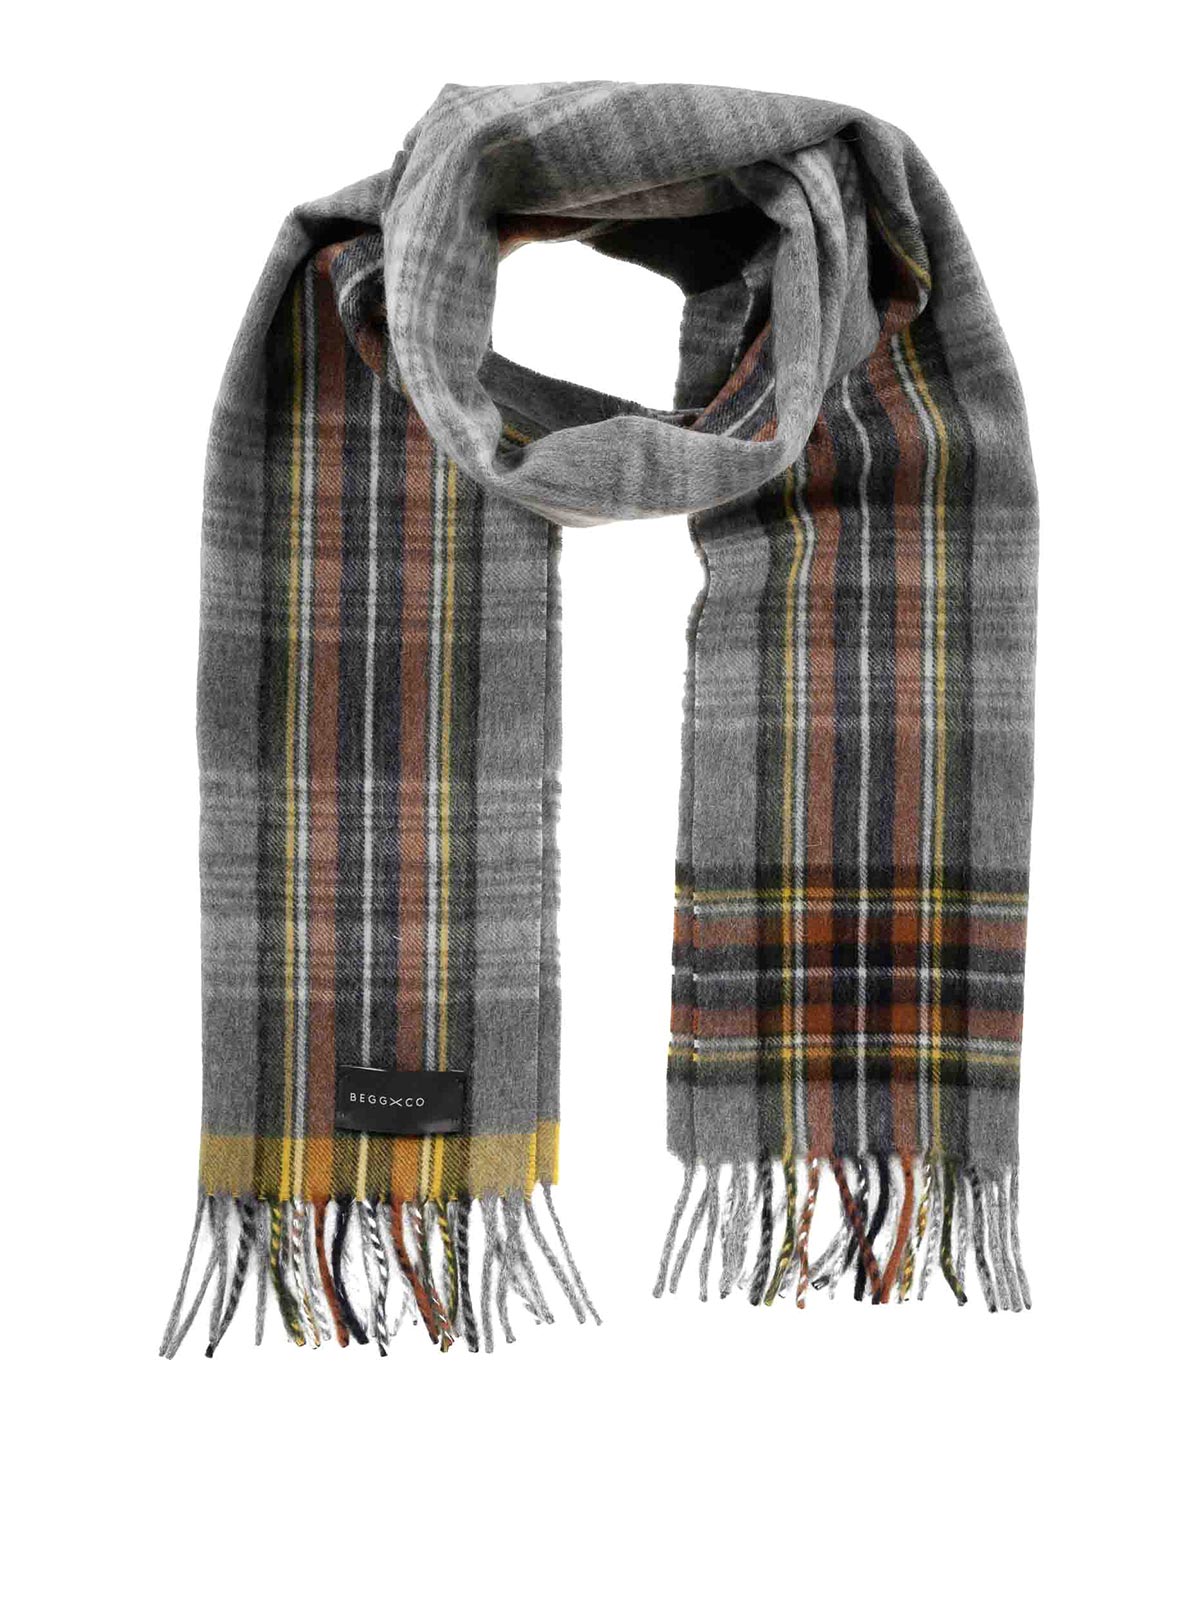 Begg X Co Patterned Scarf In Multicolour